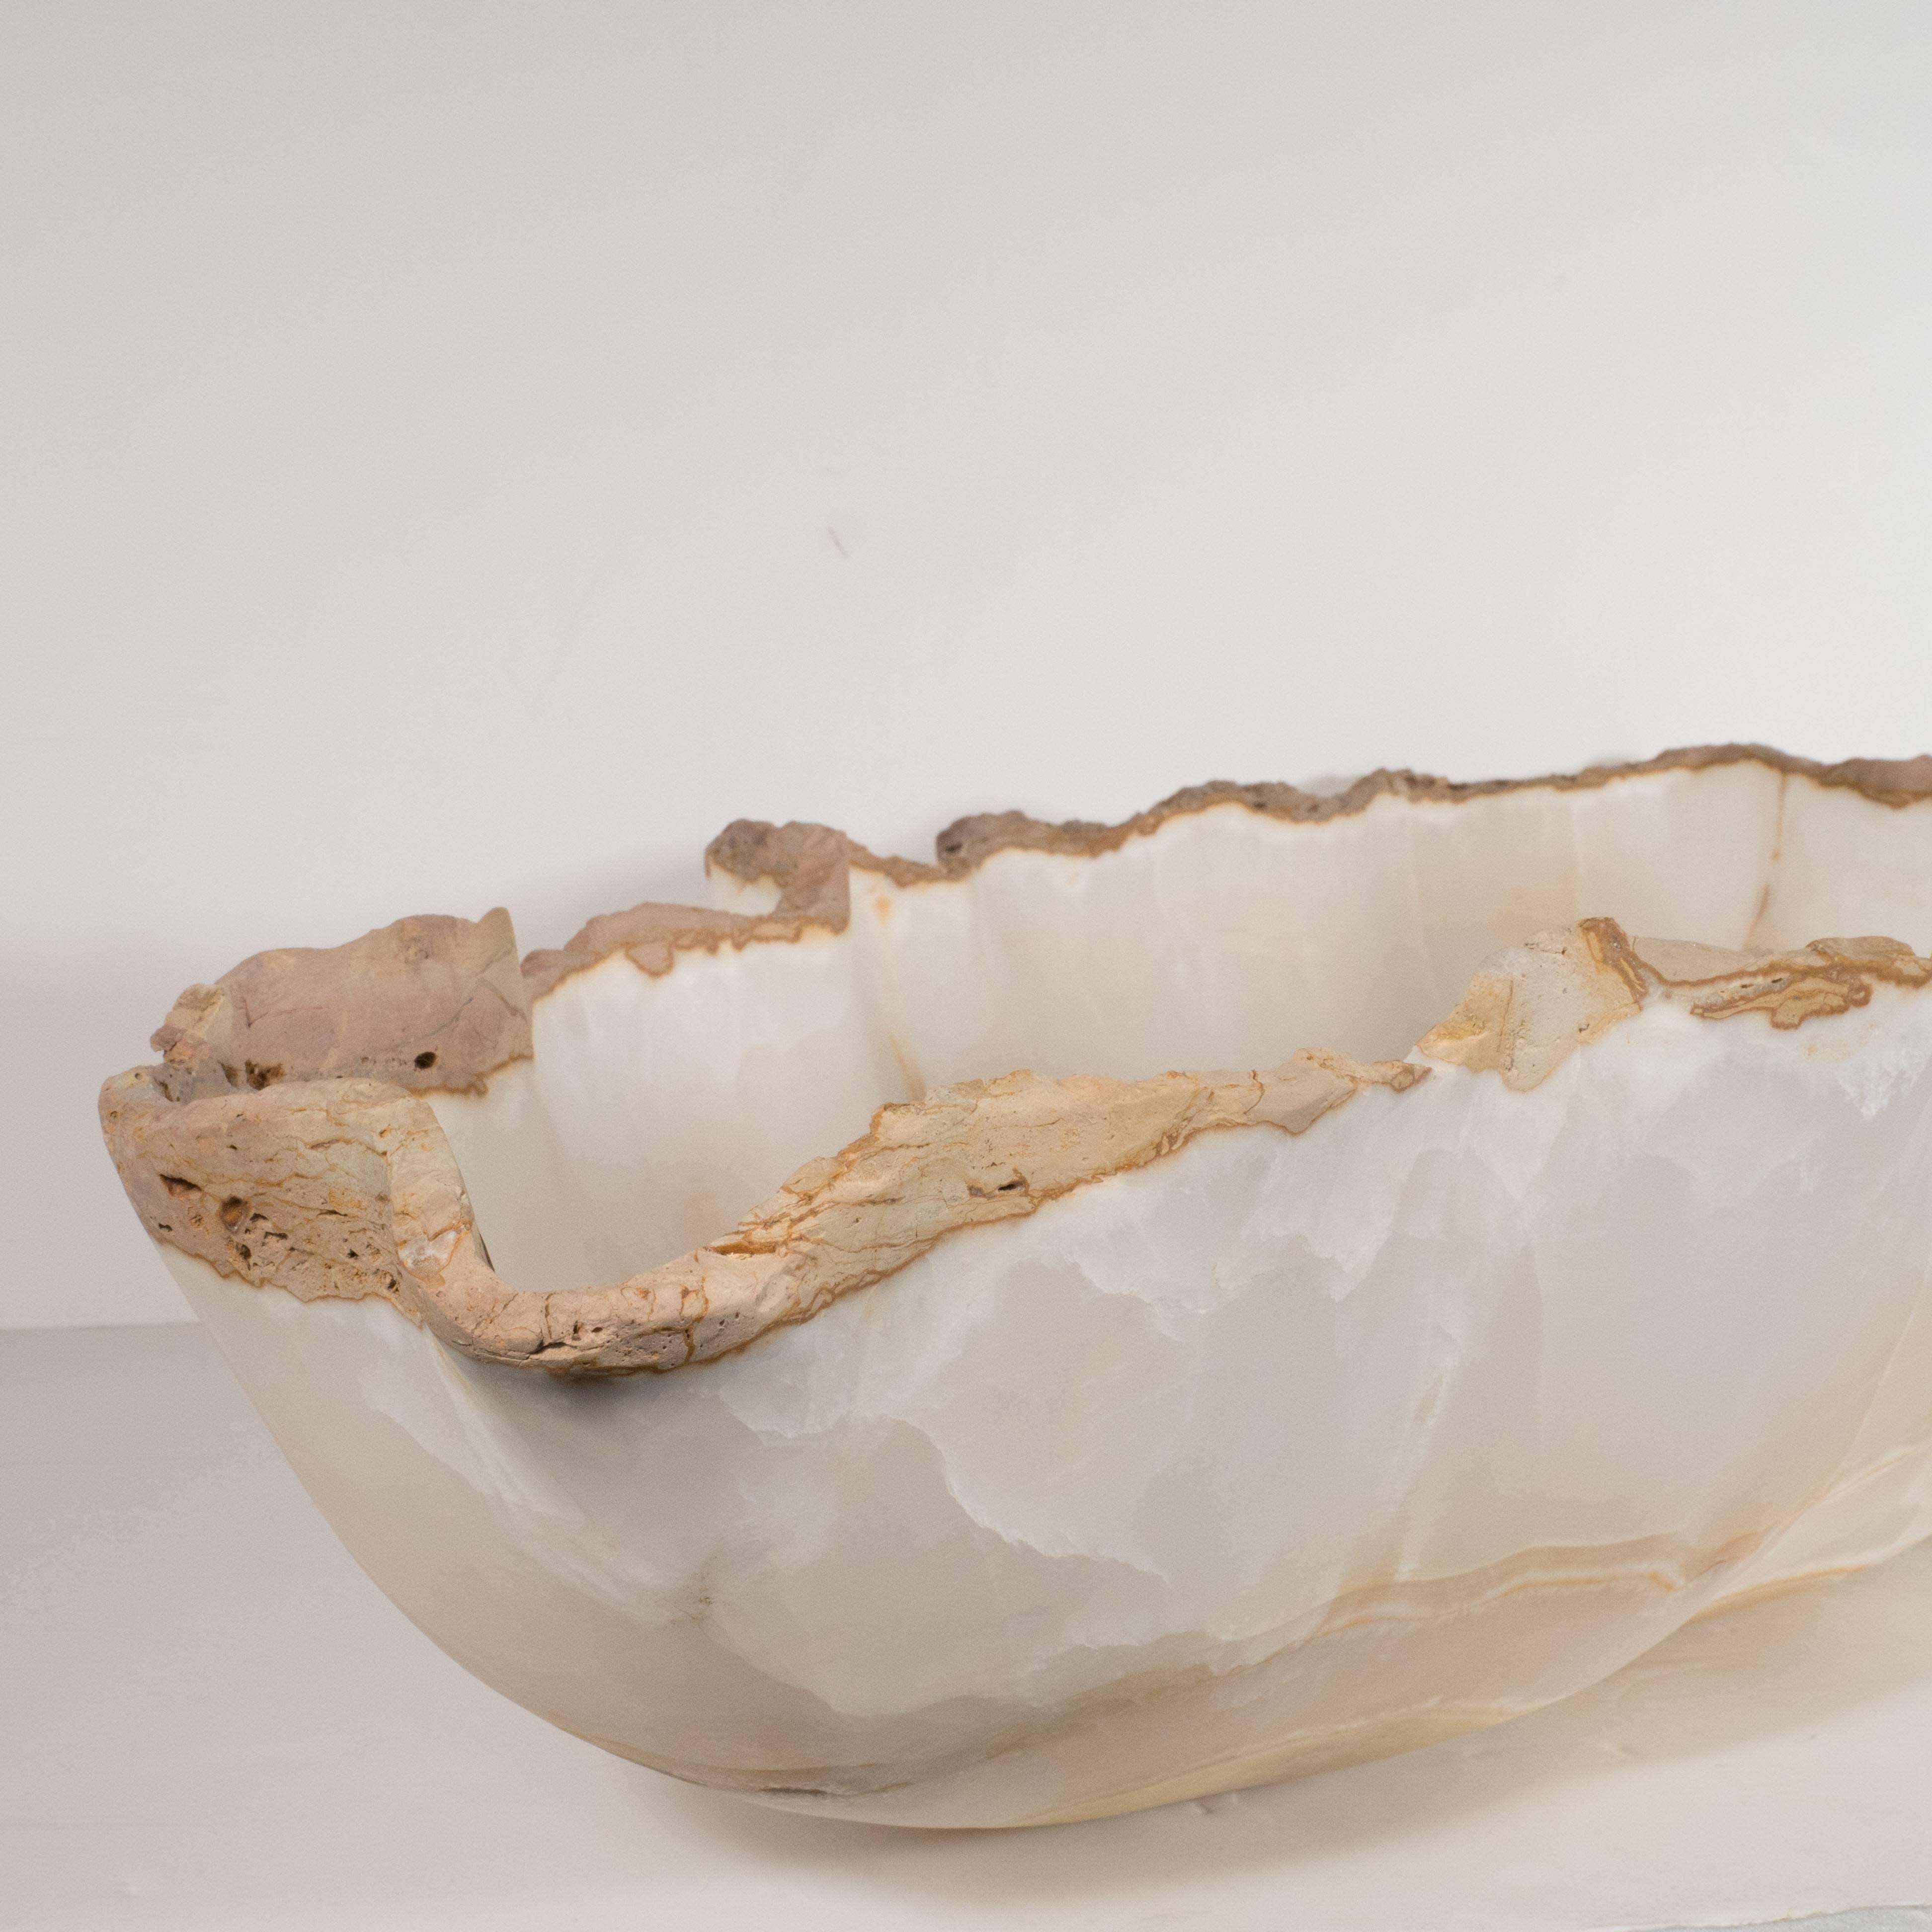 Contemporary Organic Modern Agate Bowl in Sand and Oyster Shell Hues